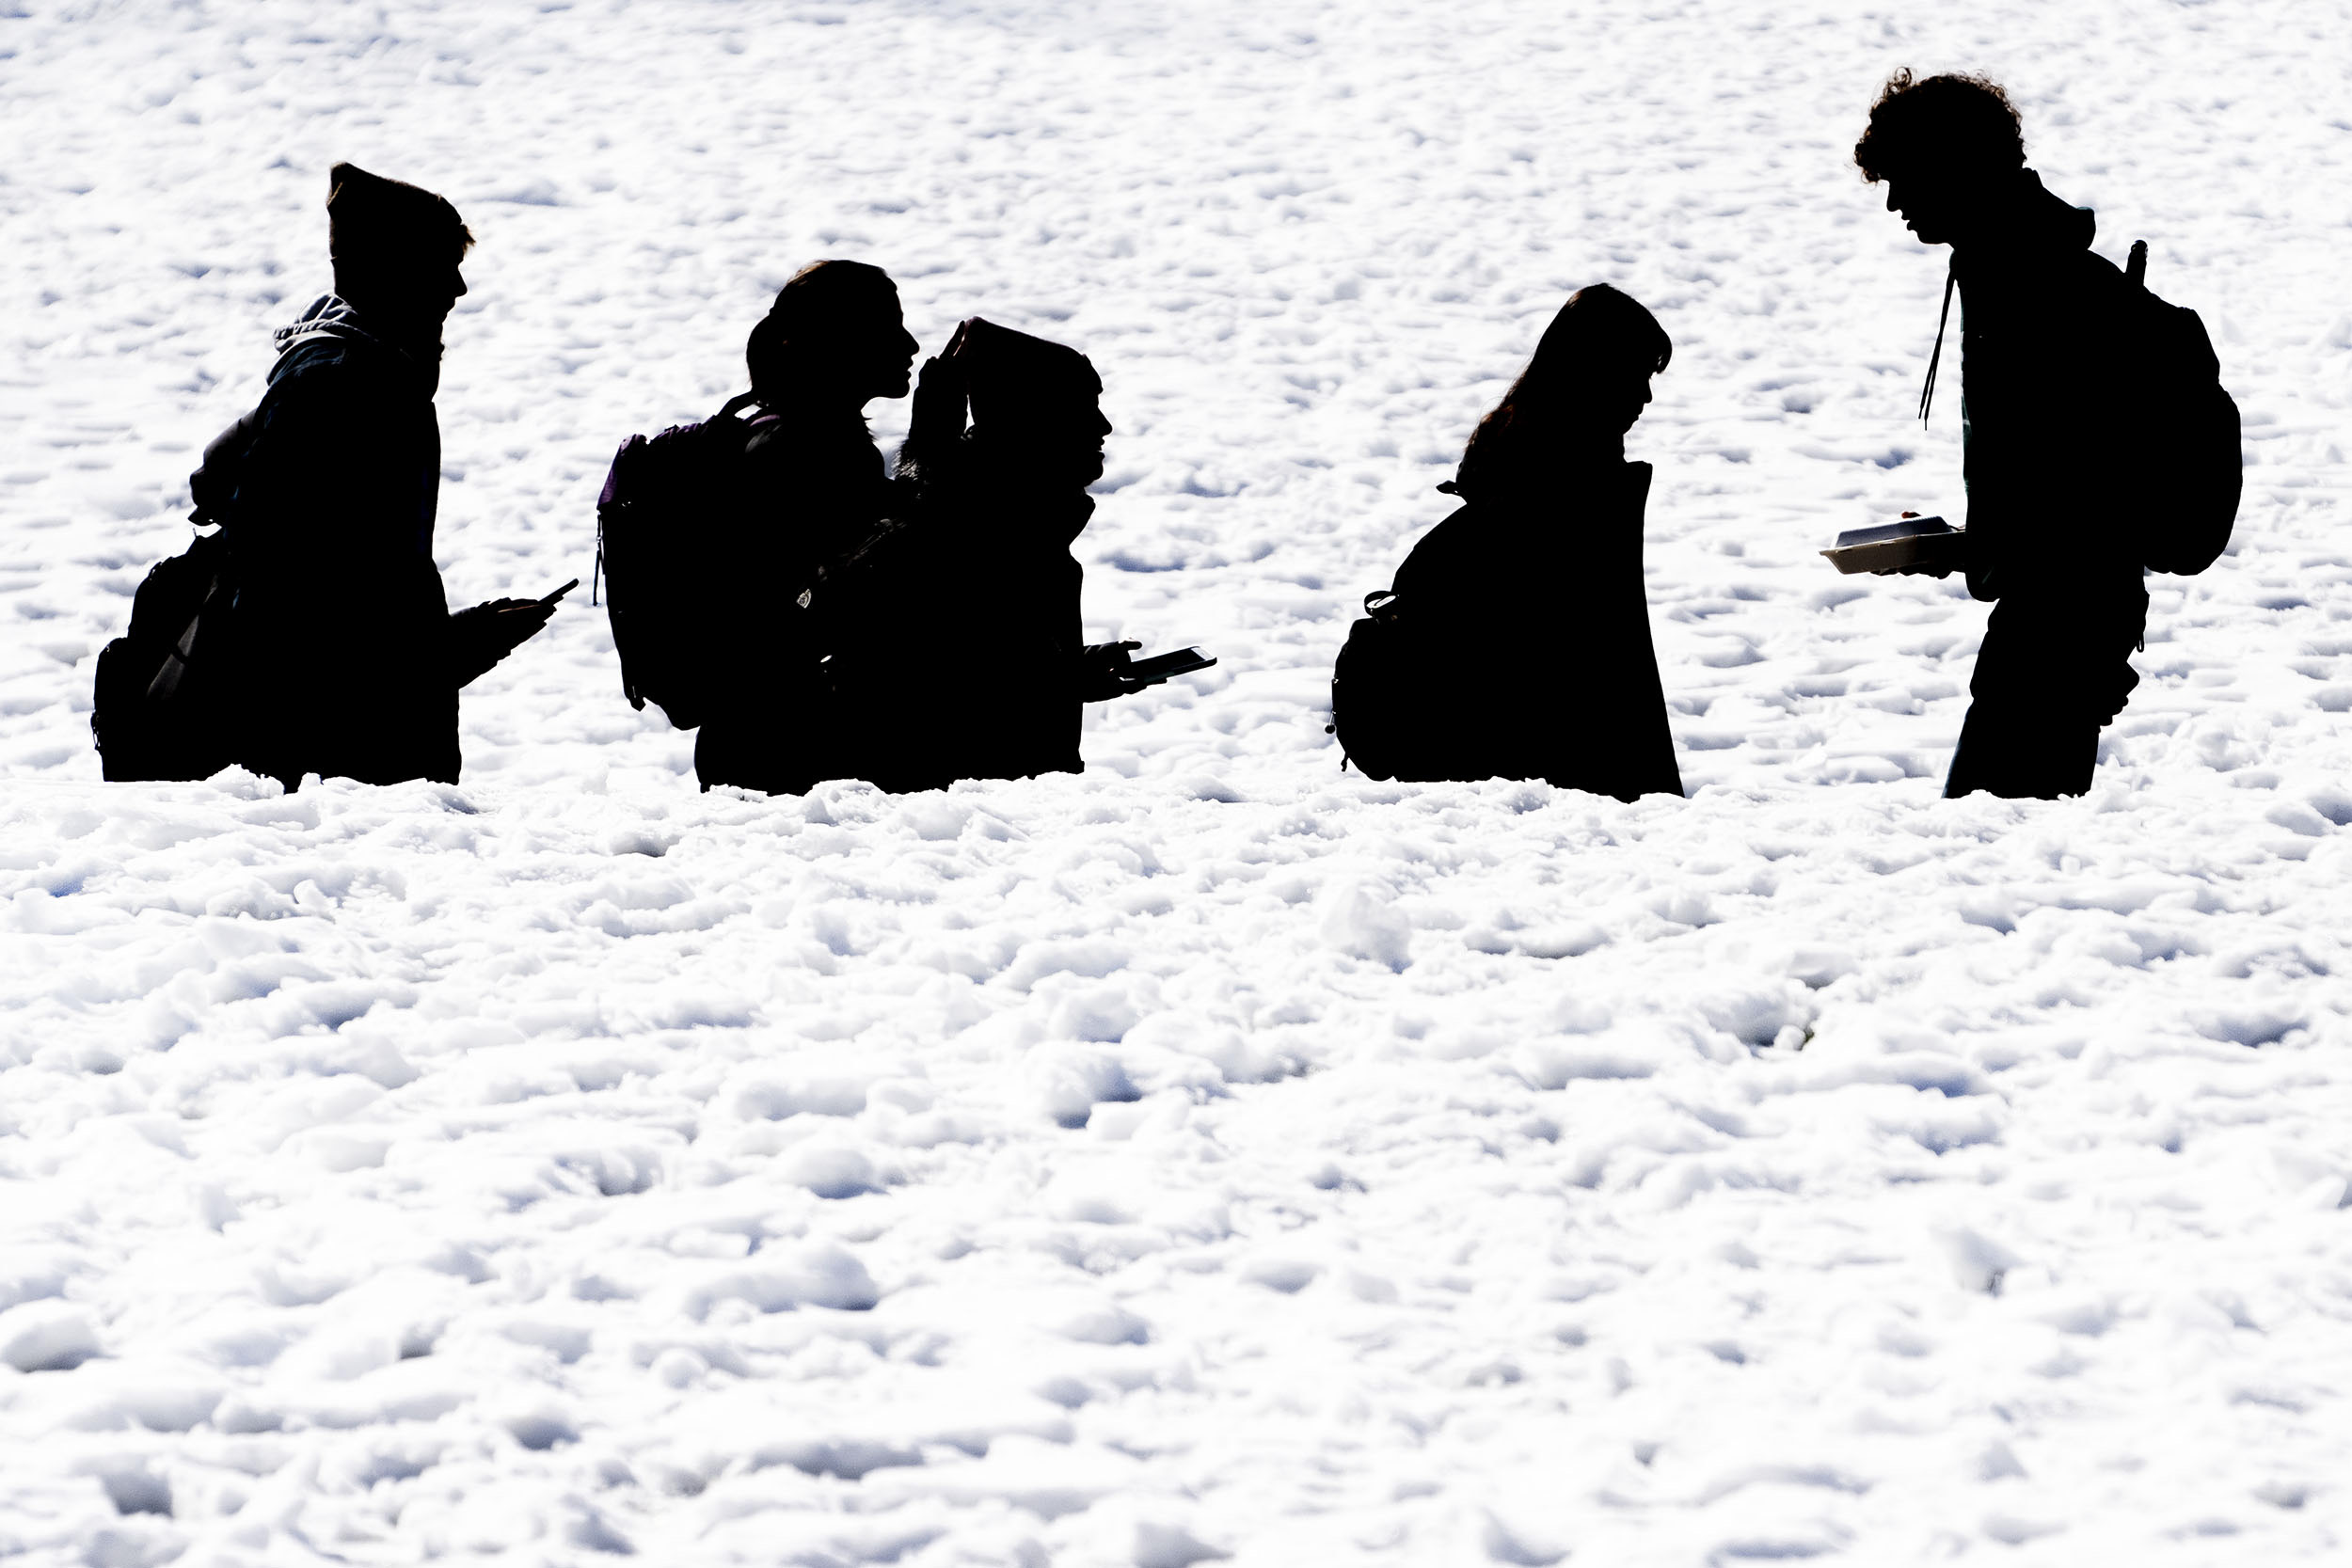 Students silhouettes in the snow